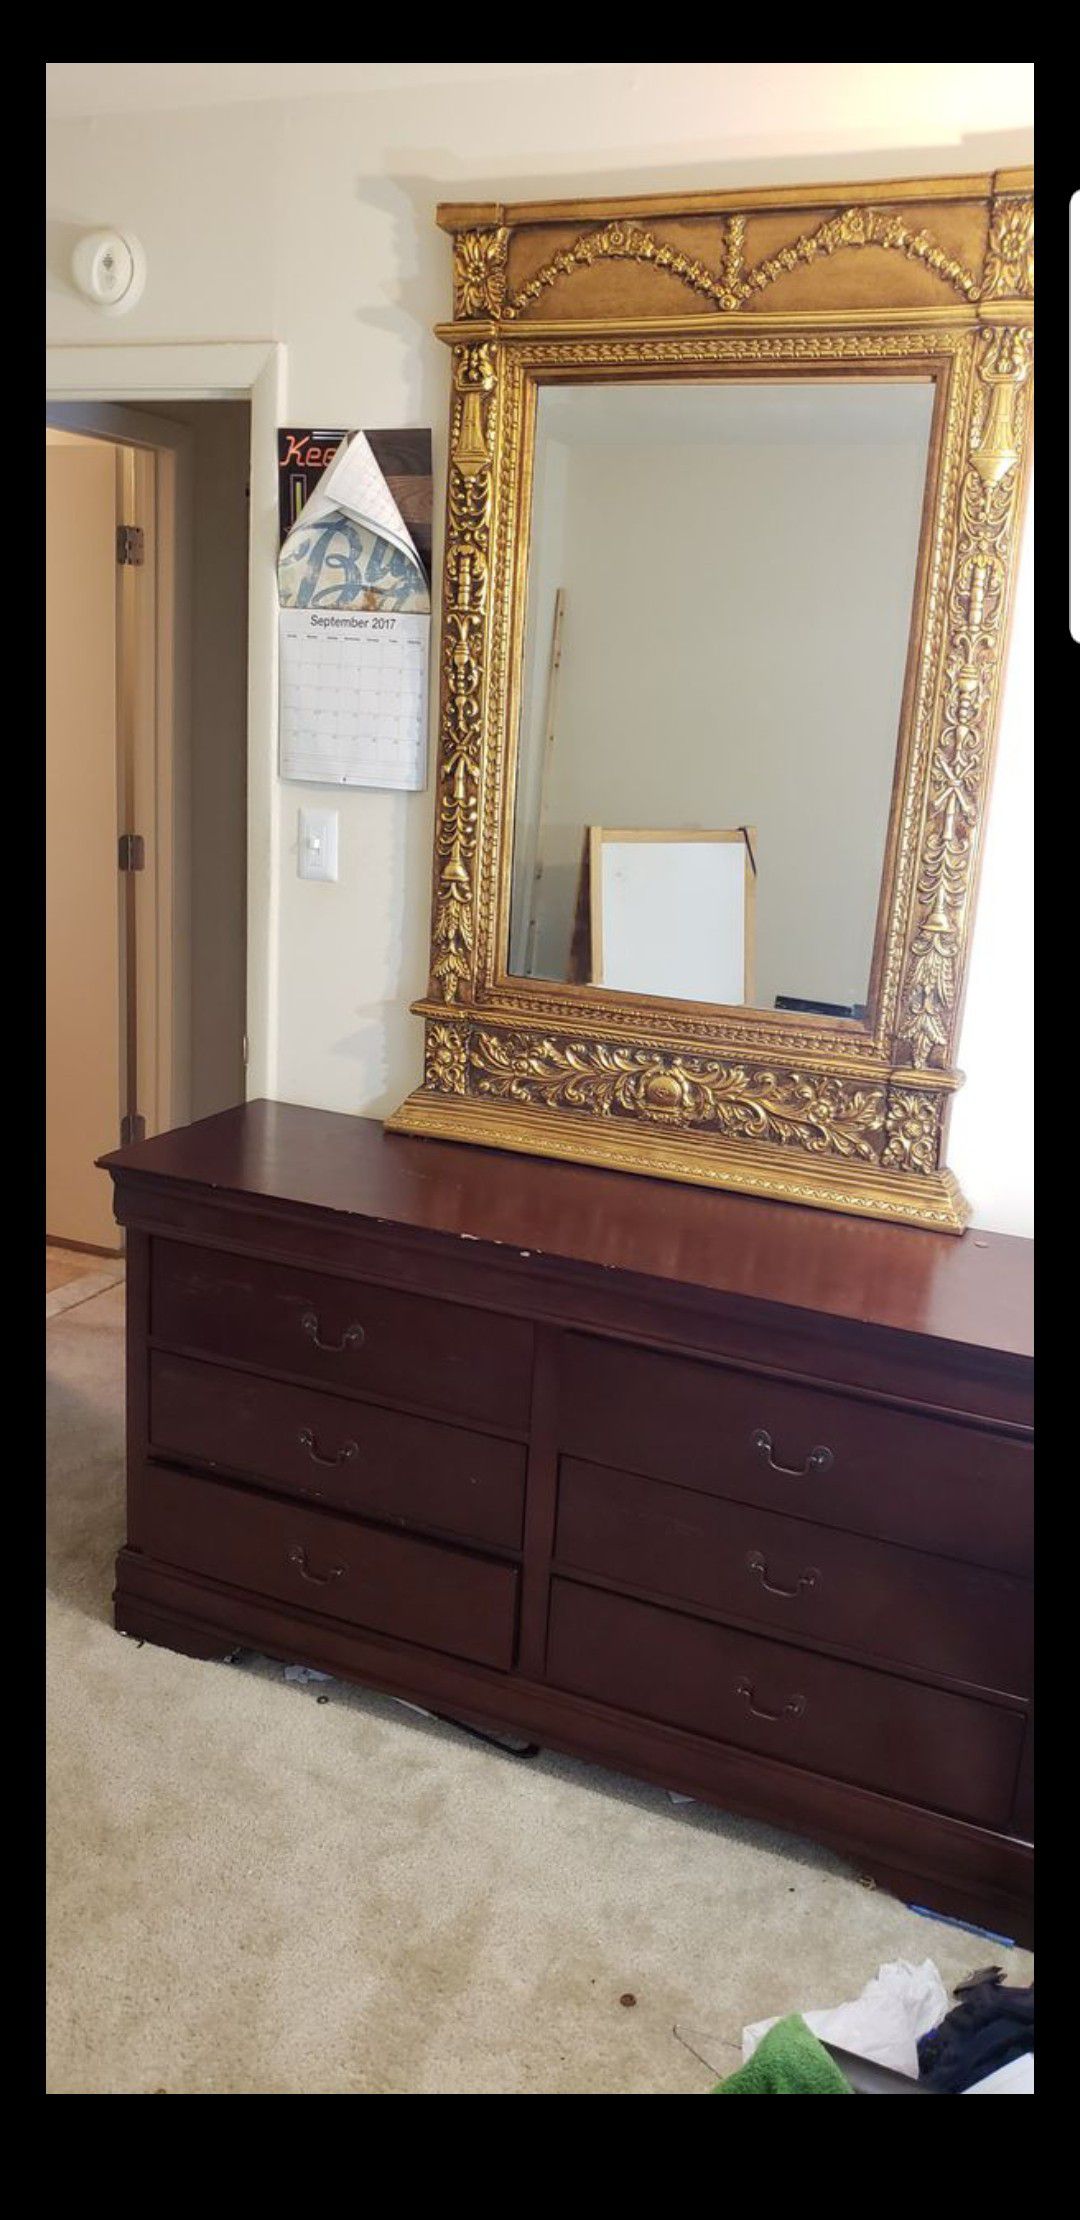 Dresser and Gold plated mirror